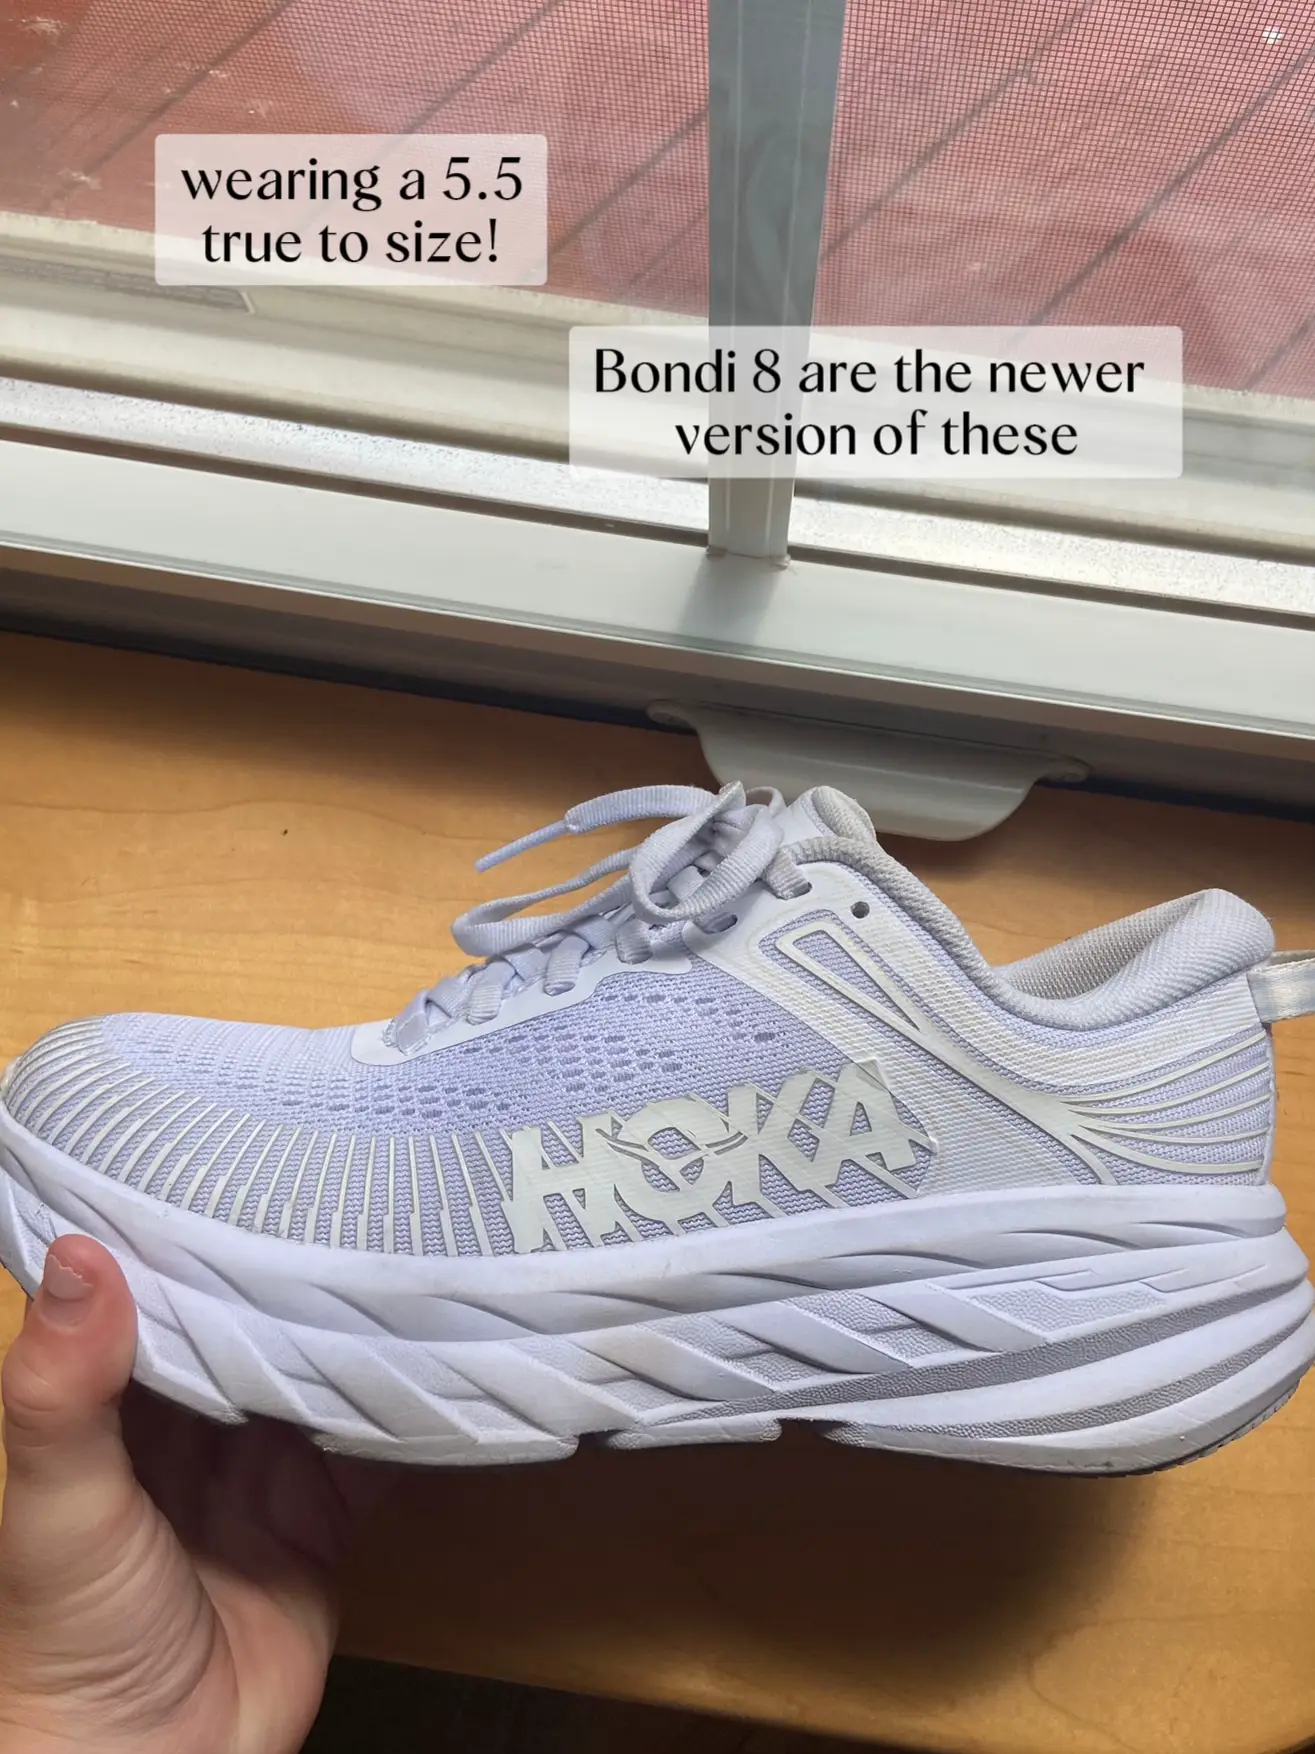 Hoka Clifton 9 Review 🏃‍♀️, Gallery posted by Caitlin Dubois